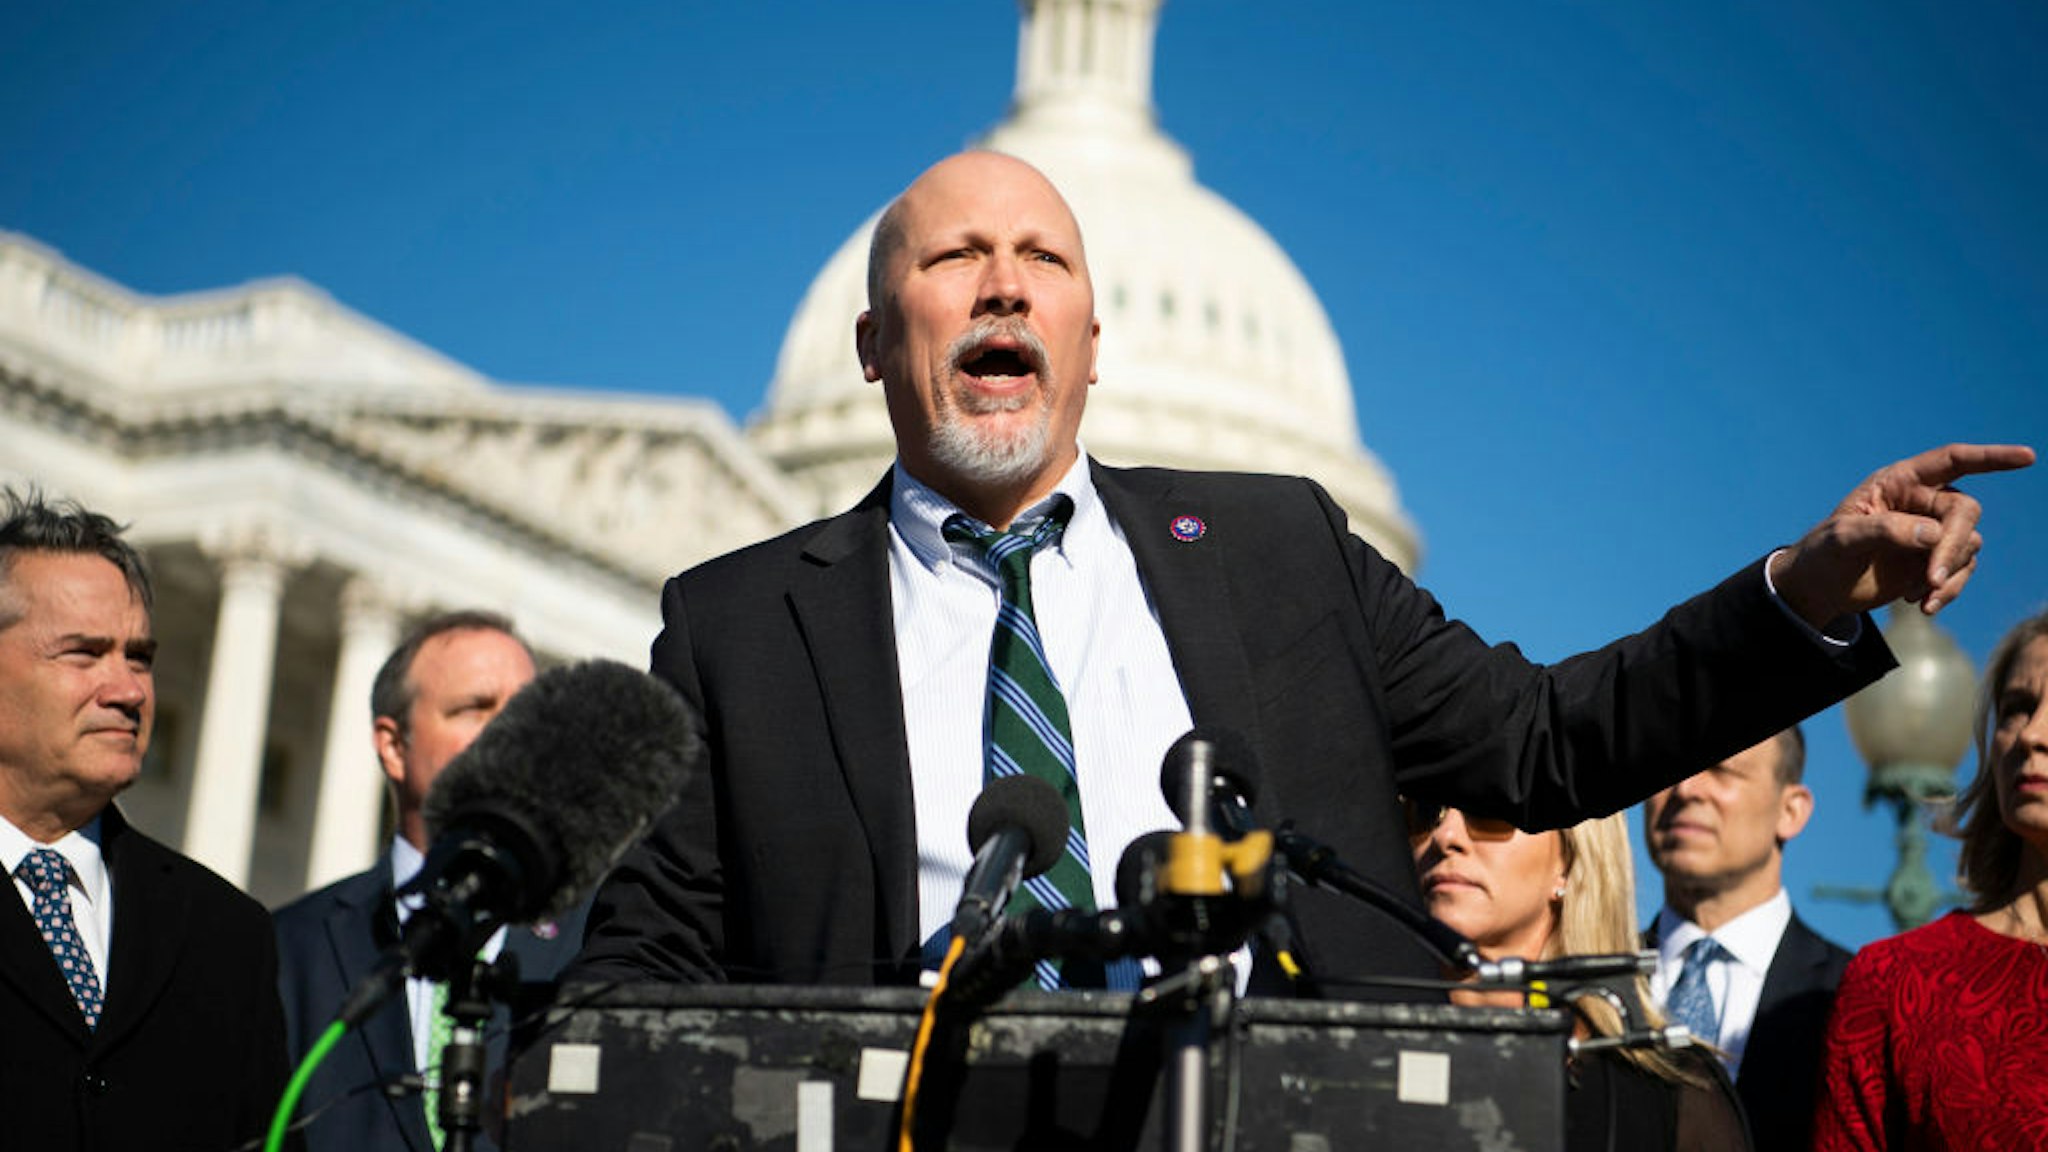 UNITED STATES - FEBRUARY 25 (FILE): Rep. Chip Roy, R-Texas, and members of the House Freedom Caucus conduct a news conference outside the Capitol to oppose the Equality Act, which prohibits discrimination on the basis of sex, gender identity, and sexual orientation, on Thursday February 25, 2021.